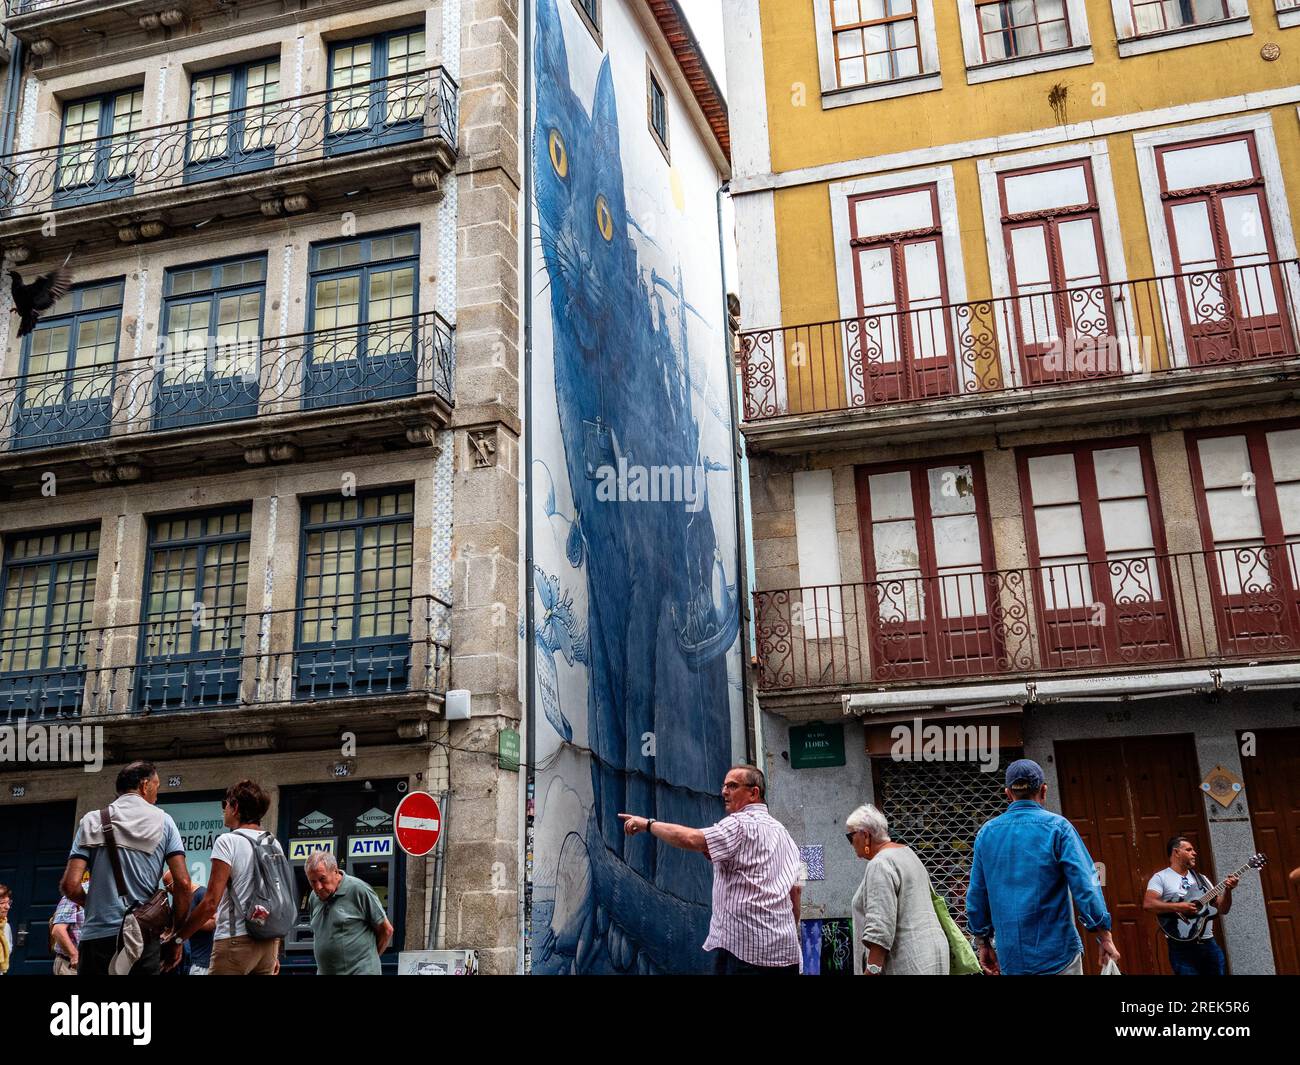 Porto, Portugal. 18th June, 2023. A huge drawn of a cat is seen painted on  a wall between buildings. Porto is Portugal's second-largest city and the  capital of the Northern region, and